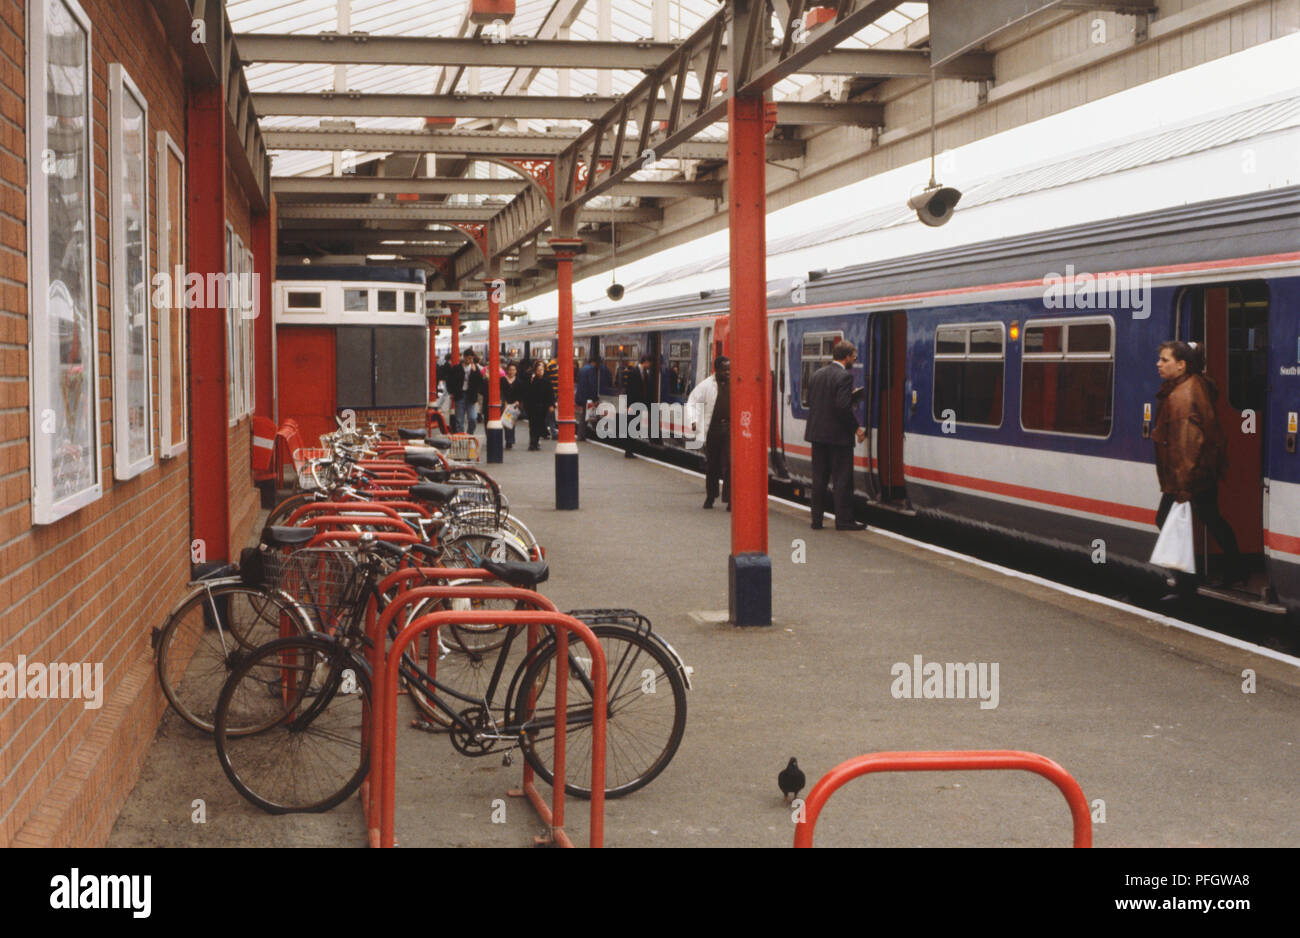 Bicycle parking area on the platform of a railway station Stock Photo